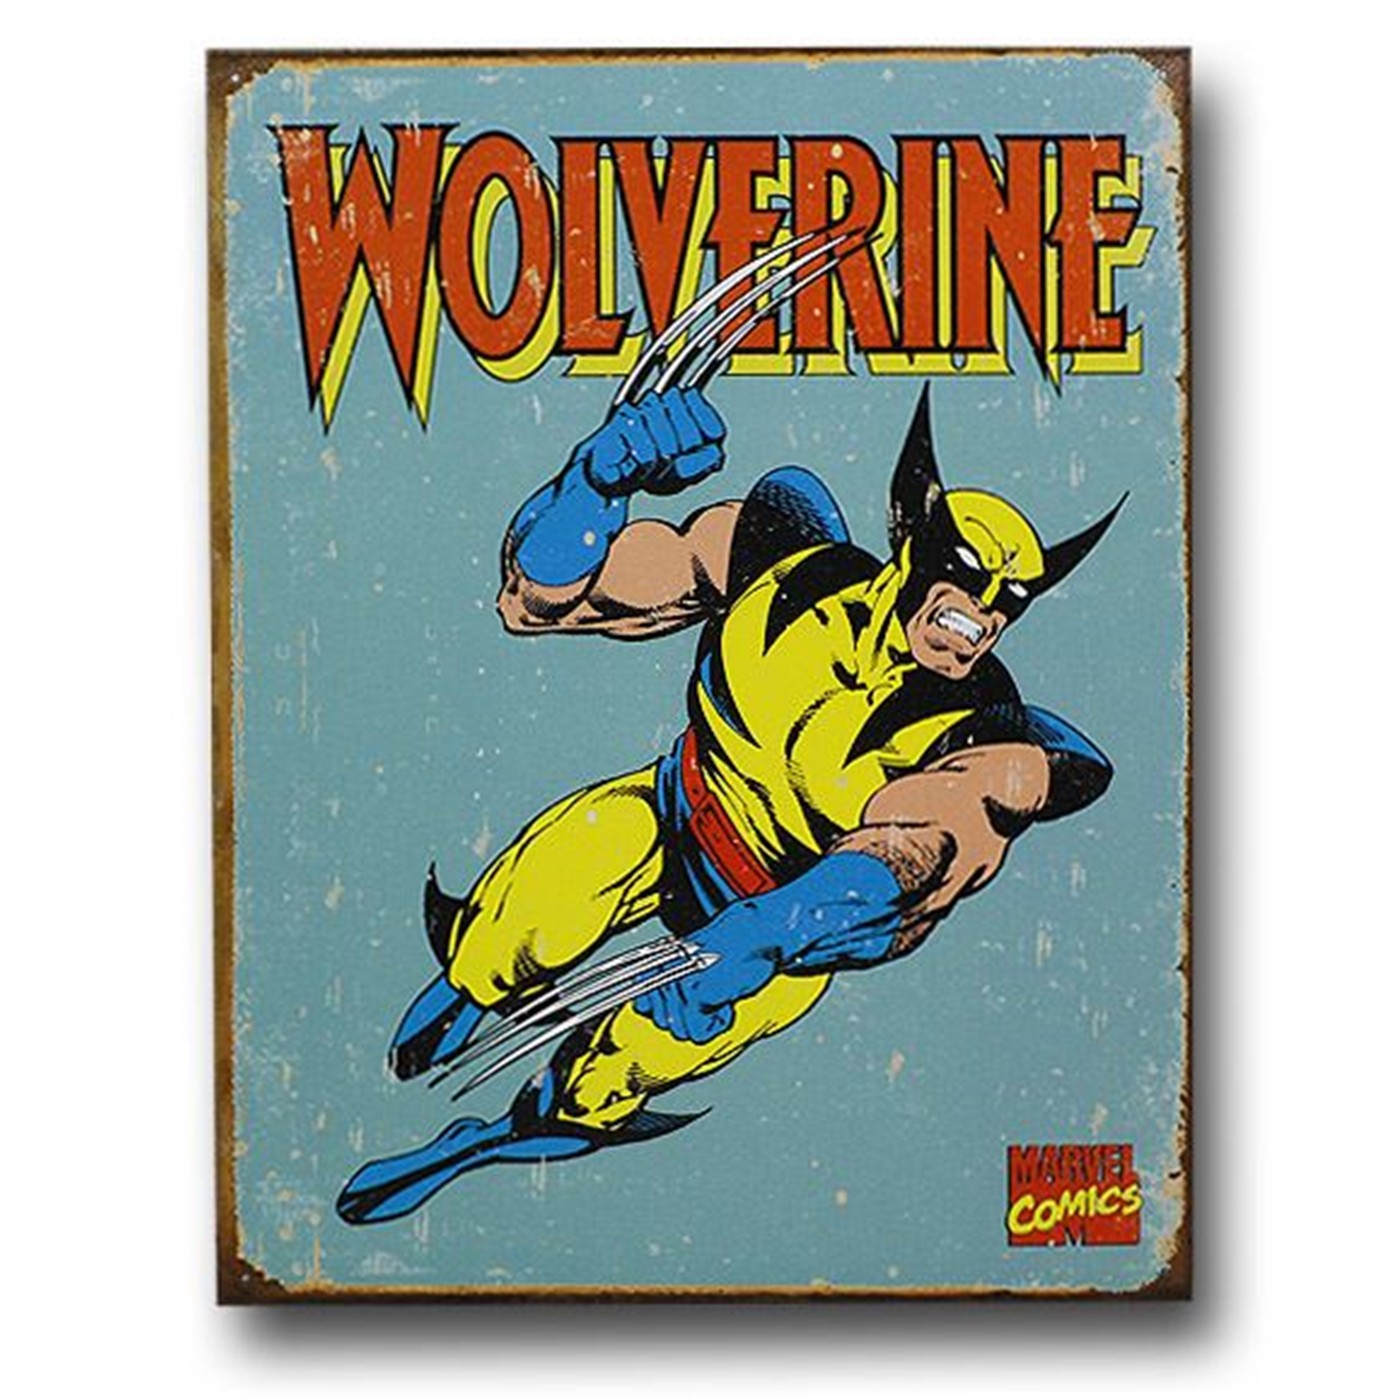 Wolverine Blue Classic Tin Poster Sign by John Byrne